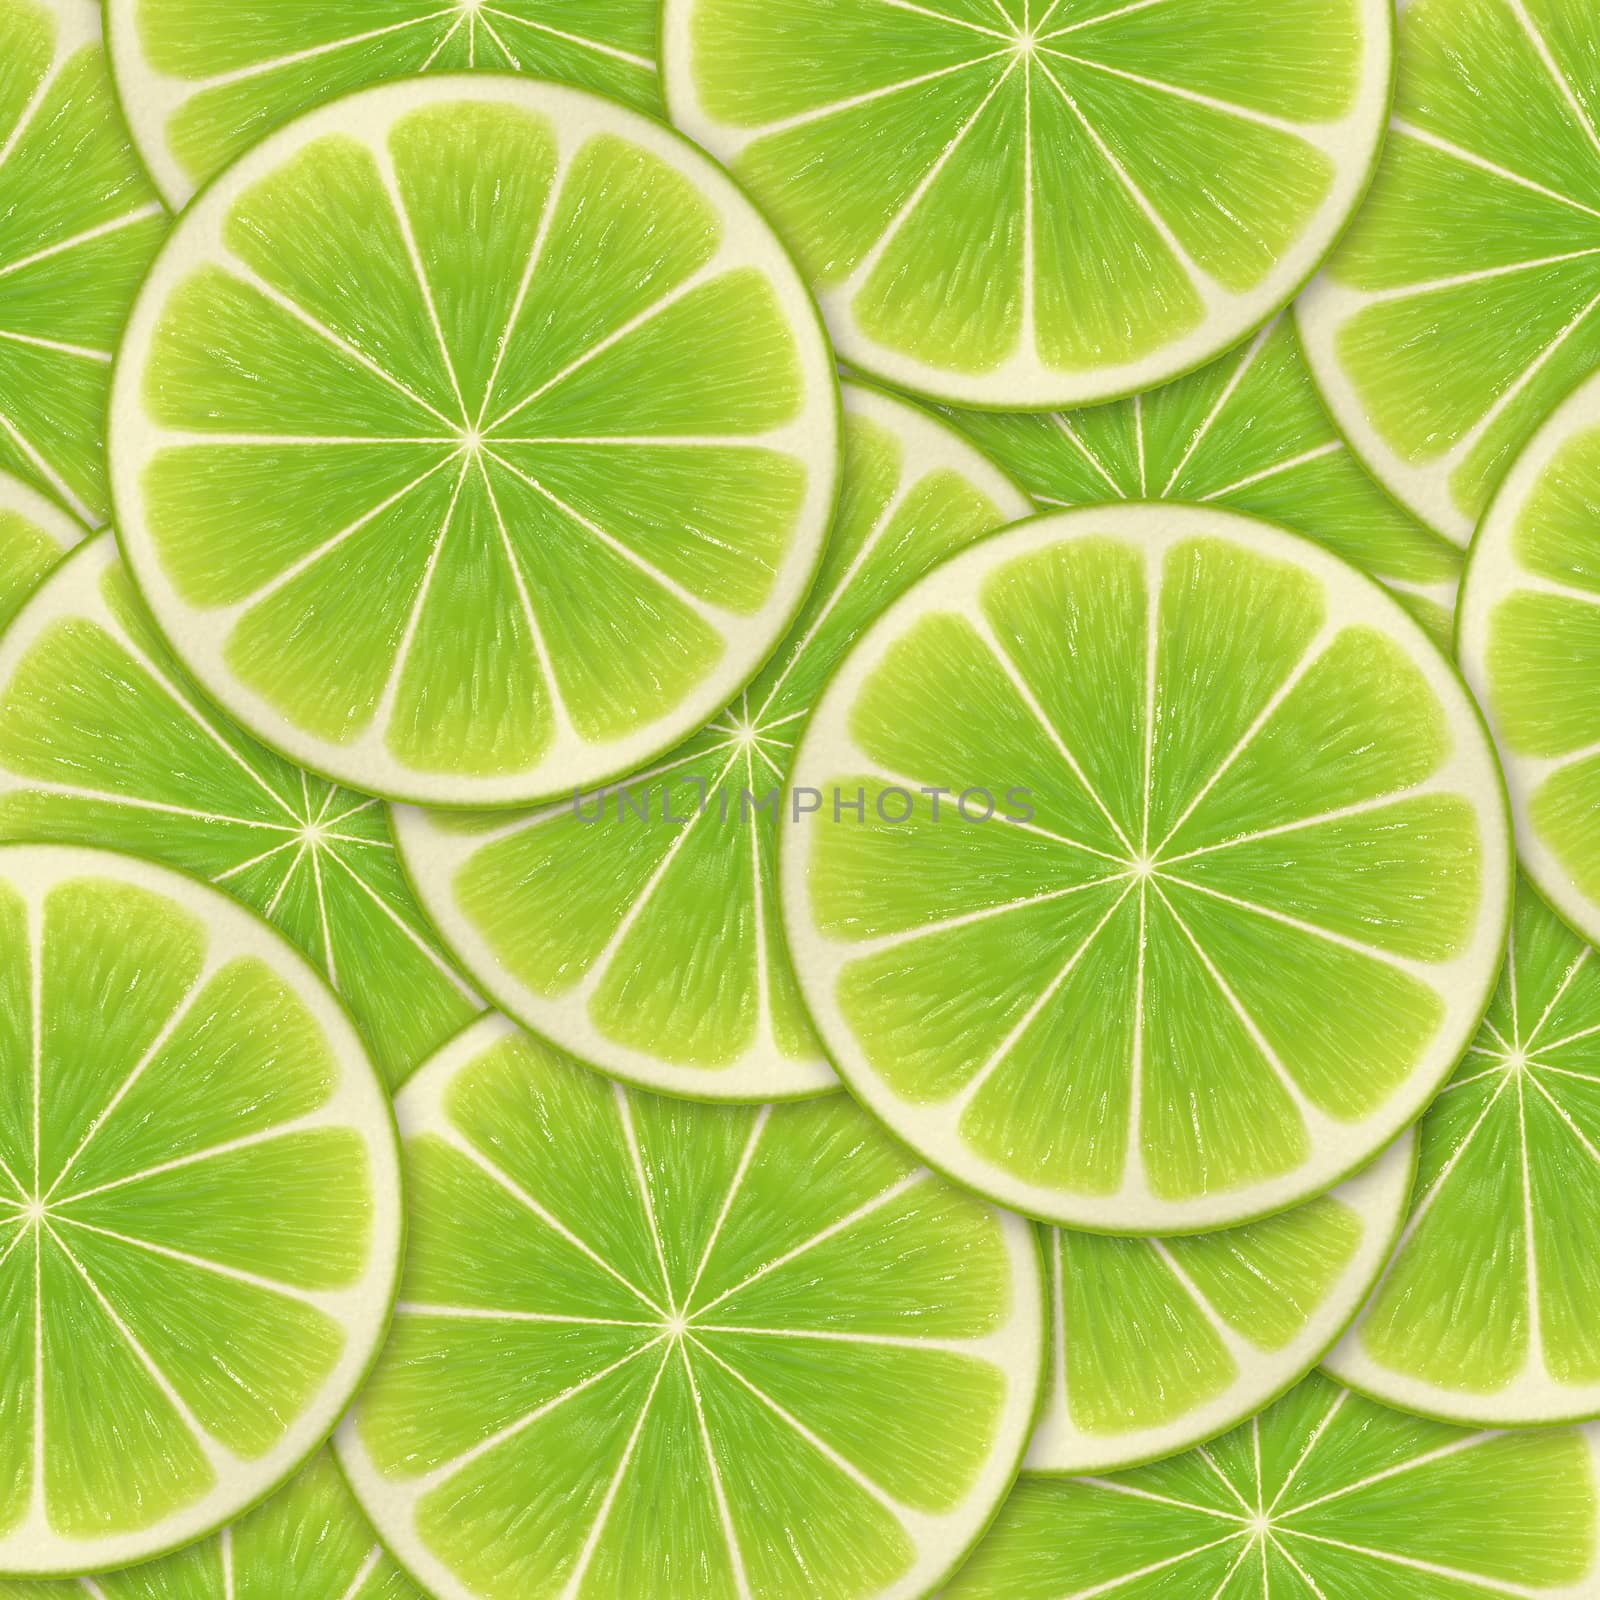 Green background with citrus-fruit of lime slices by Attila